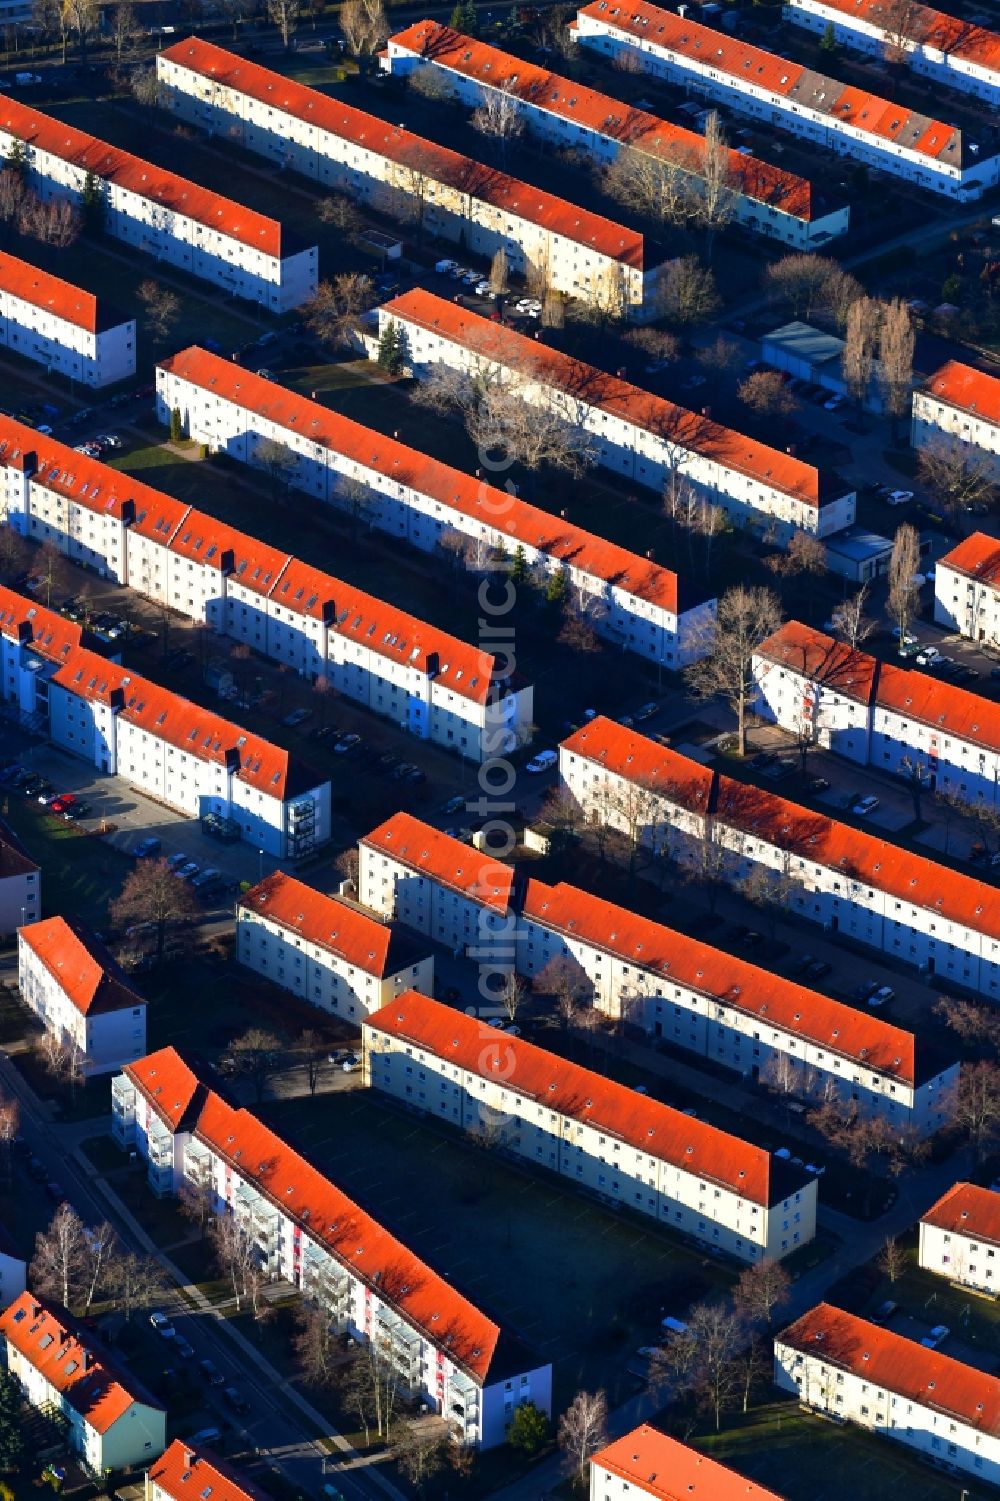 Bad Dürrenberg from above - Residential area of the multi-family house settlement along the Mozartstrasse - Beethovenstrasse in Bad Duerrenberg in the state Saxony-Anhalt, Germany